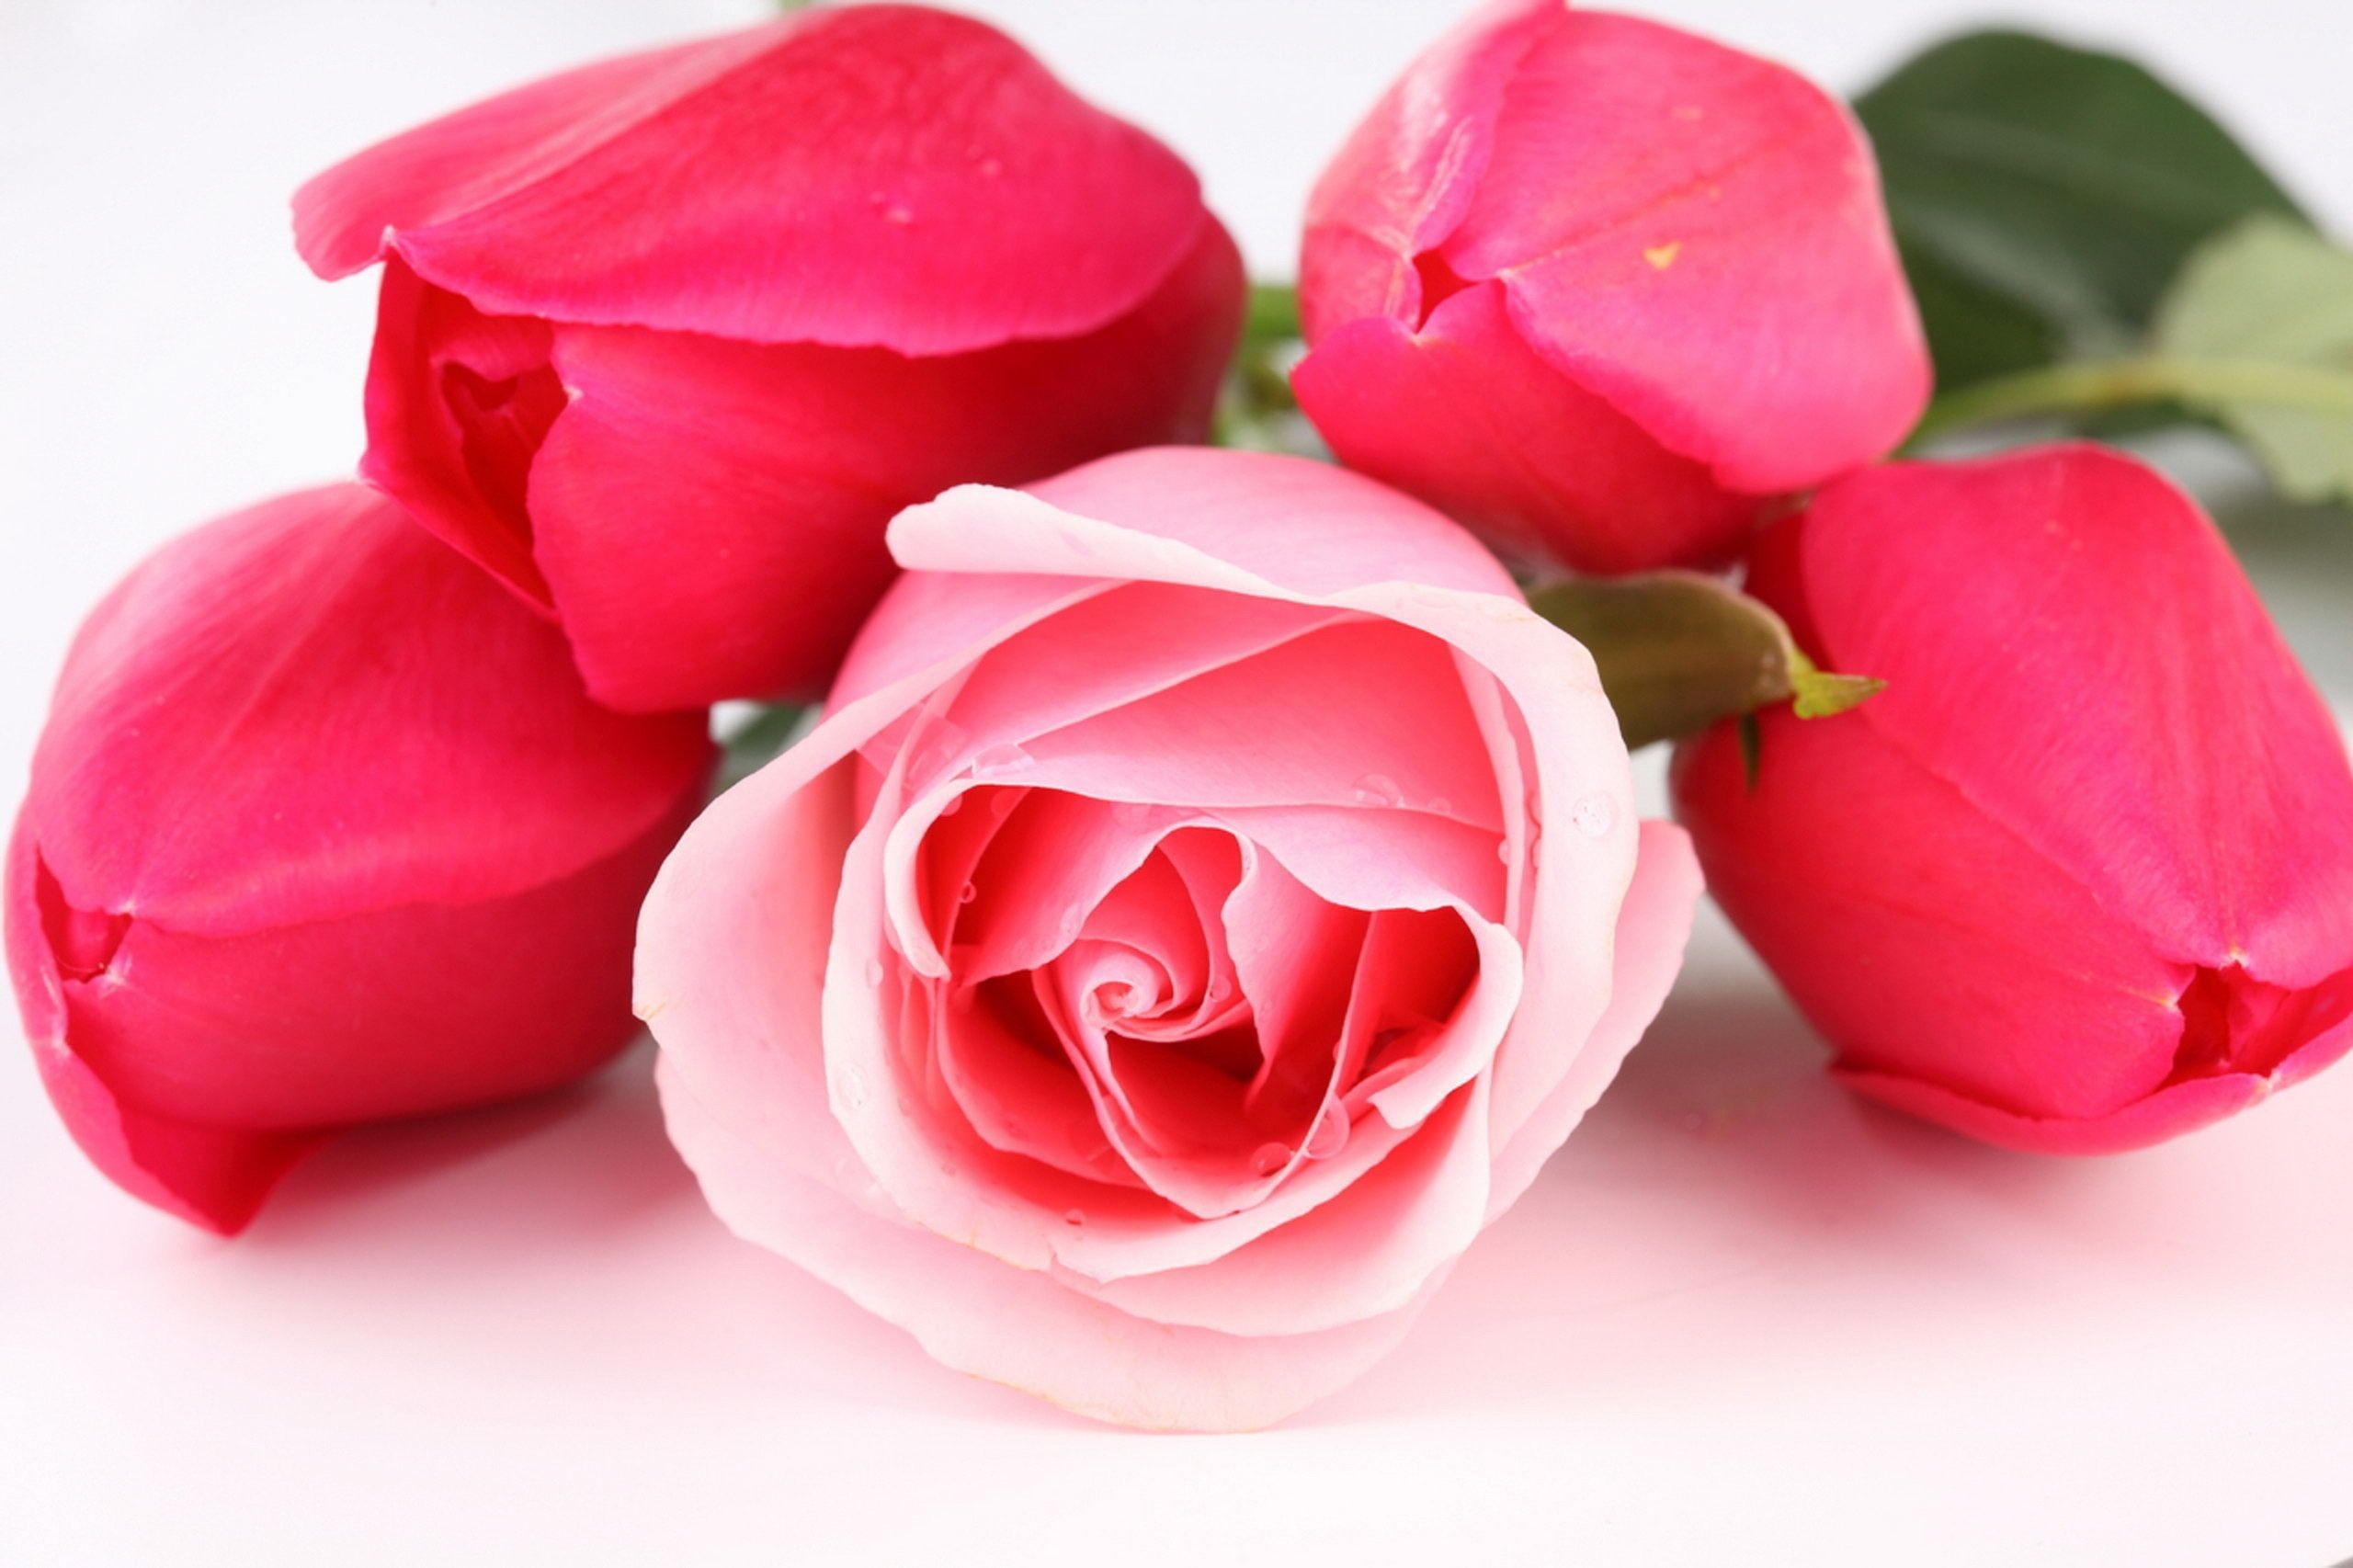 Rose HD Wallpapers Backgrounds Wallpaper